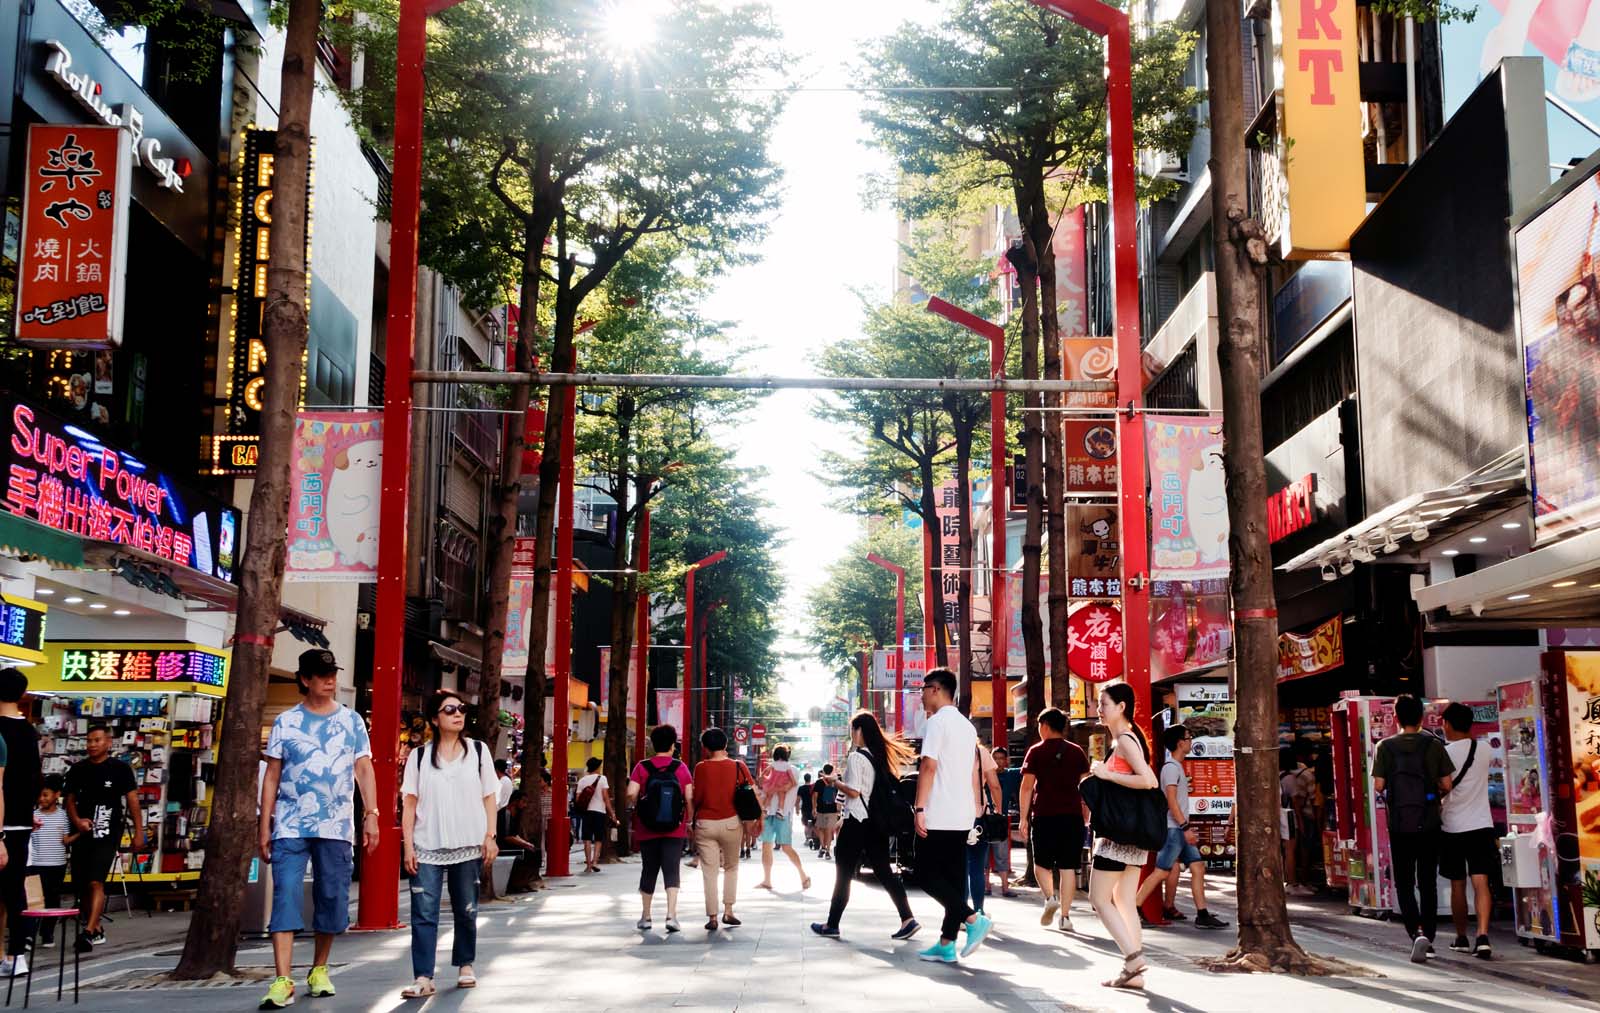 Ximending Walking District, a popular area in Taipei full of shops, bars and restaurants